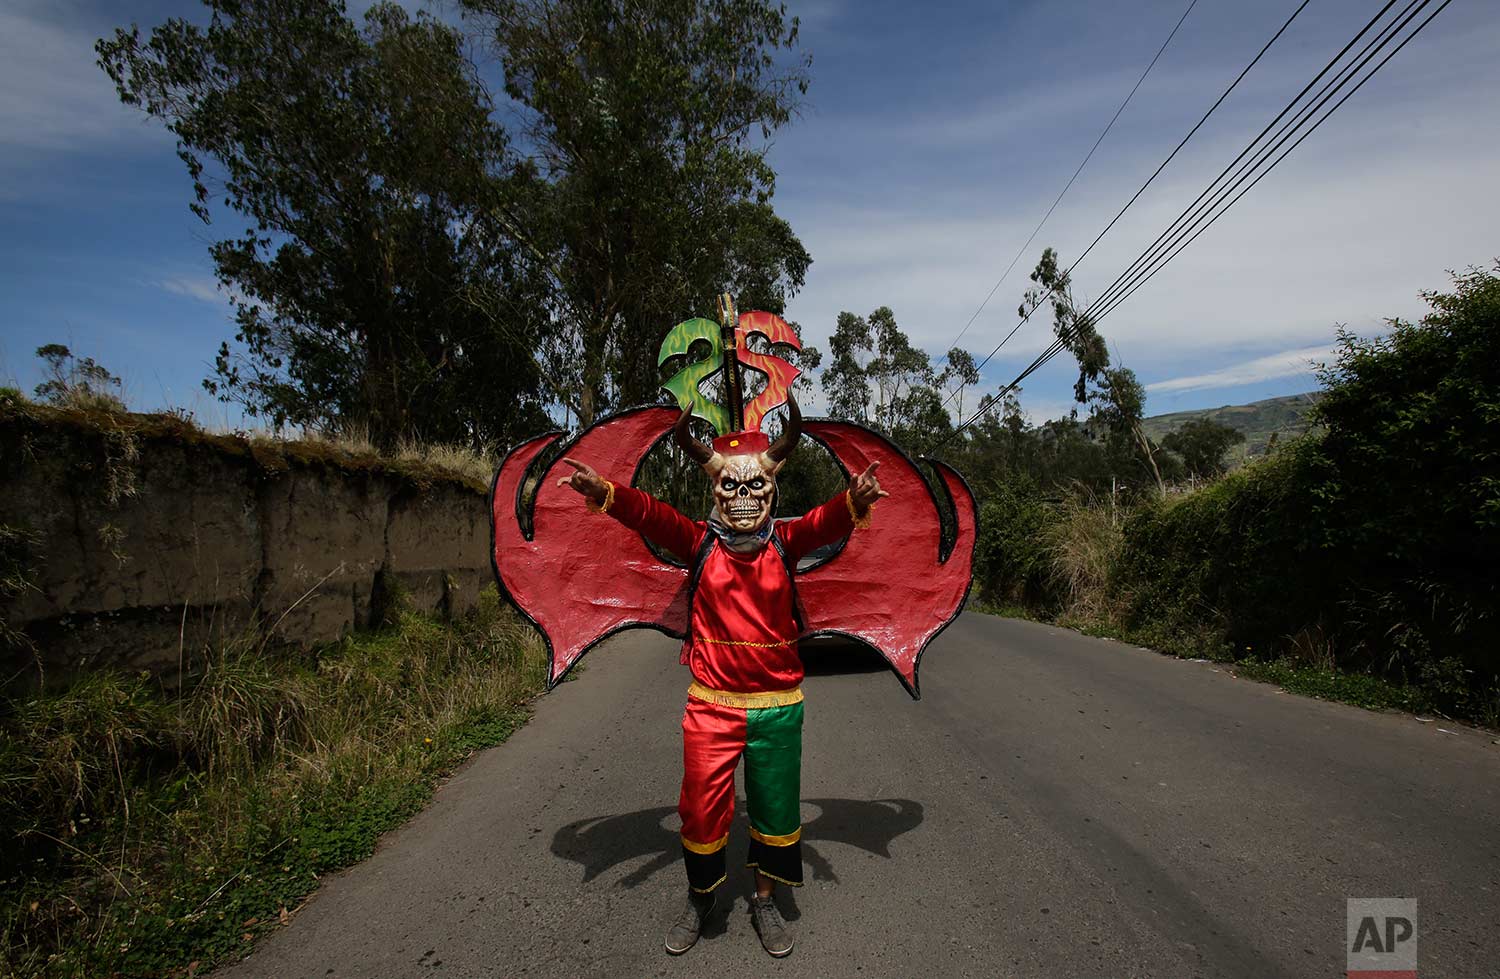  Dressed for the traditional New Year's festival known as "La Diablada", a participant strikes a pose in Pillaro, Ecuador, Friday, Jan. 5, 2018. (AP Photo/Dolores Ochoa) 